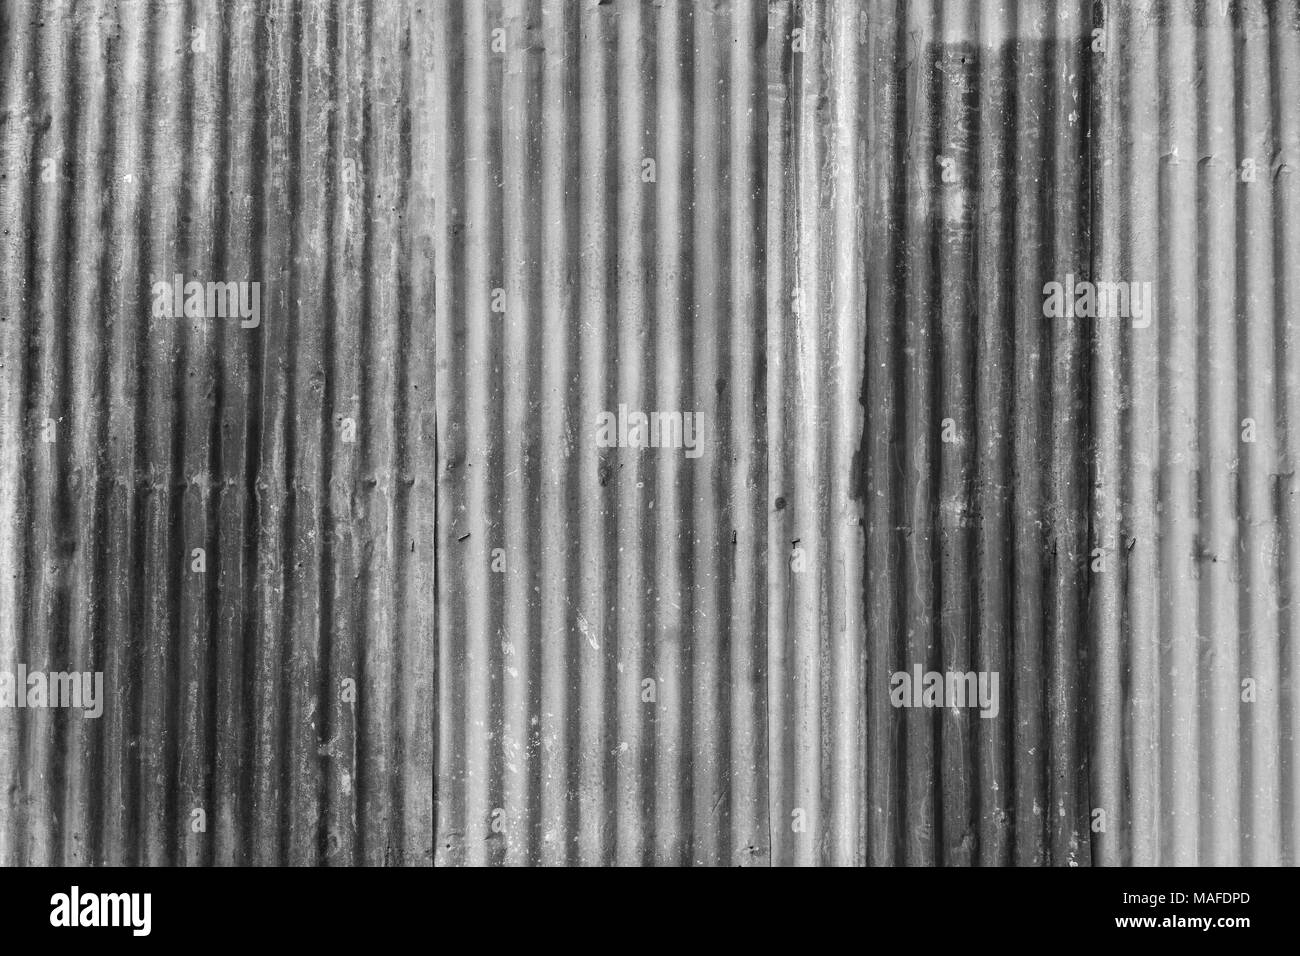 Rusty and corrugated iron metal construction site wall texture background in black and white. Stock Photo